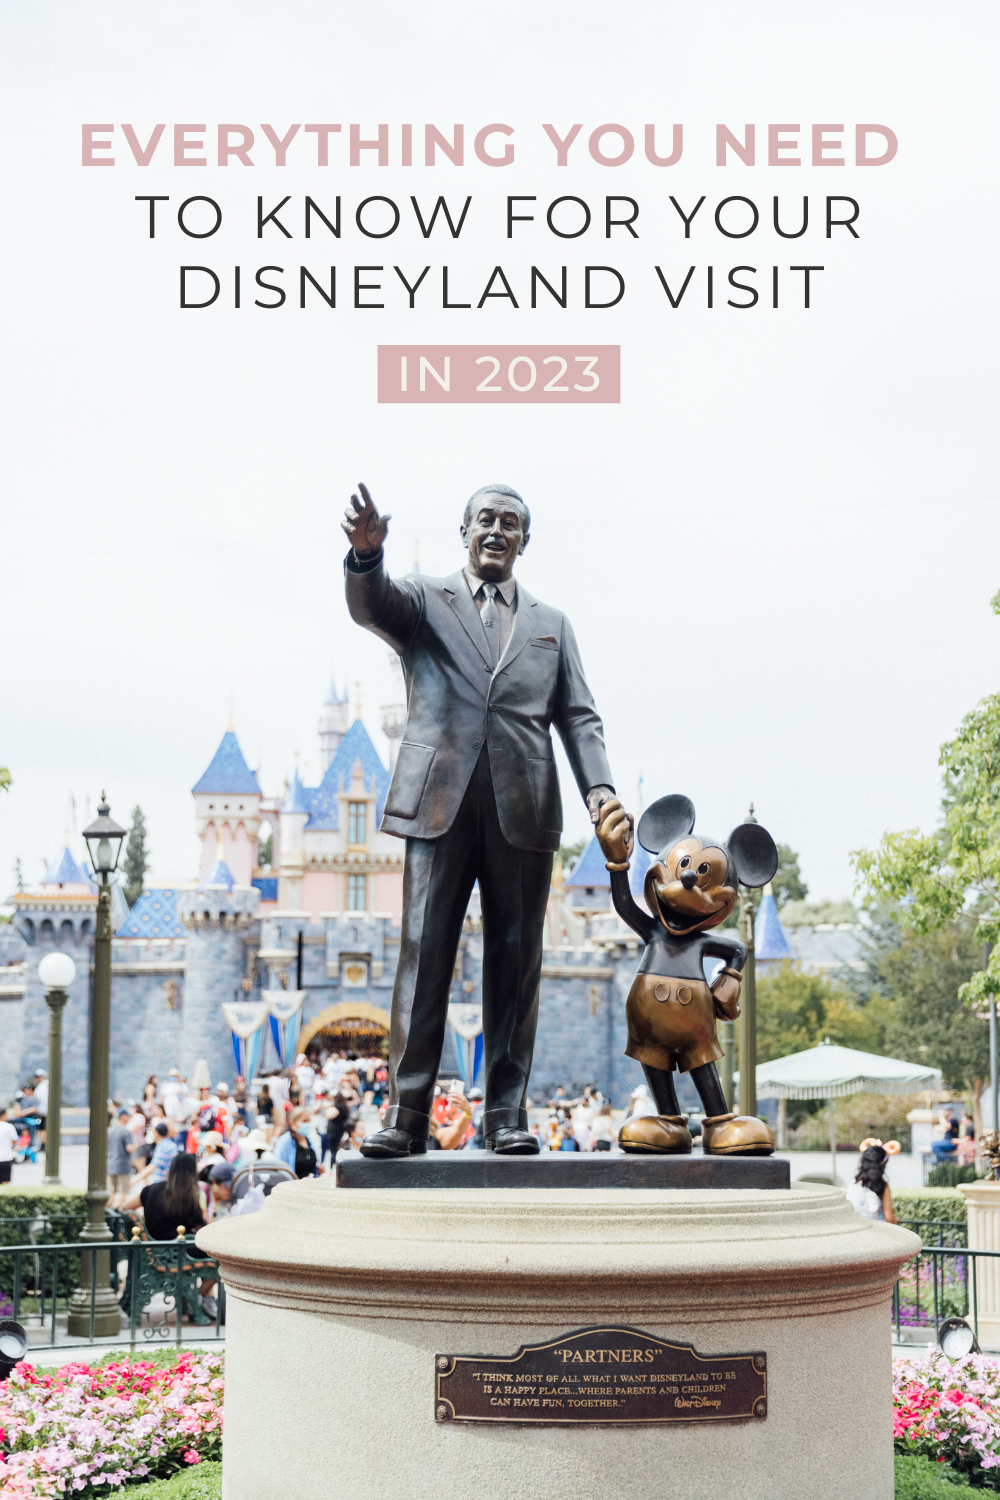 Everything You Need to Know for Visiting Disneyland in 2023